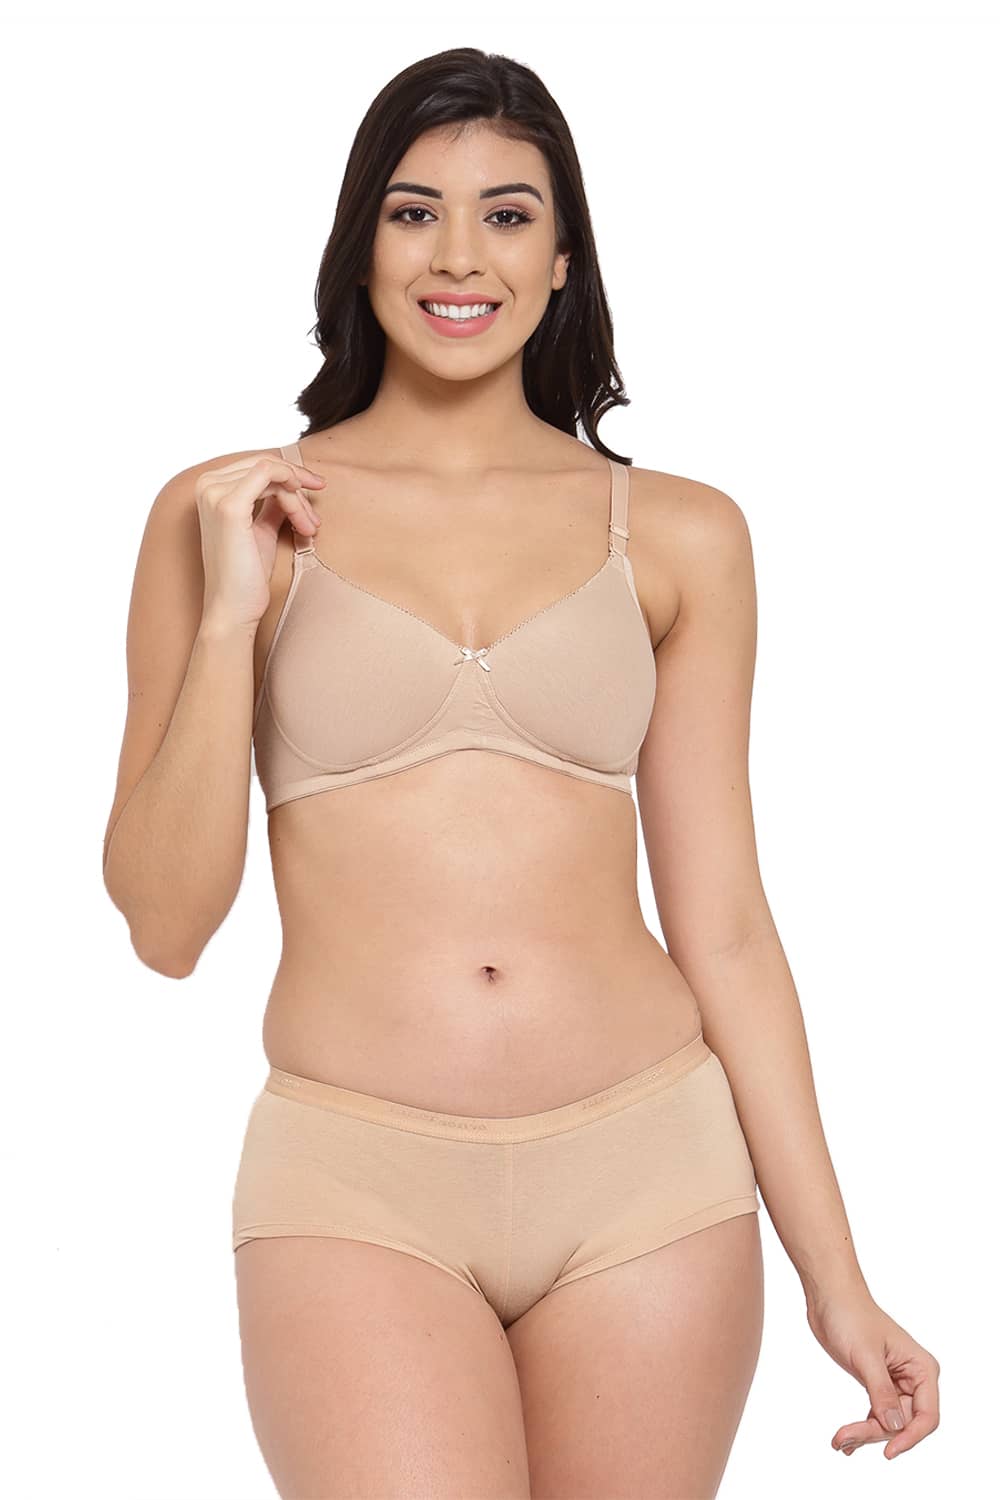 Buy Cotton Underwired Padded Front Open Cage Bra Online India